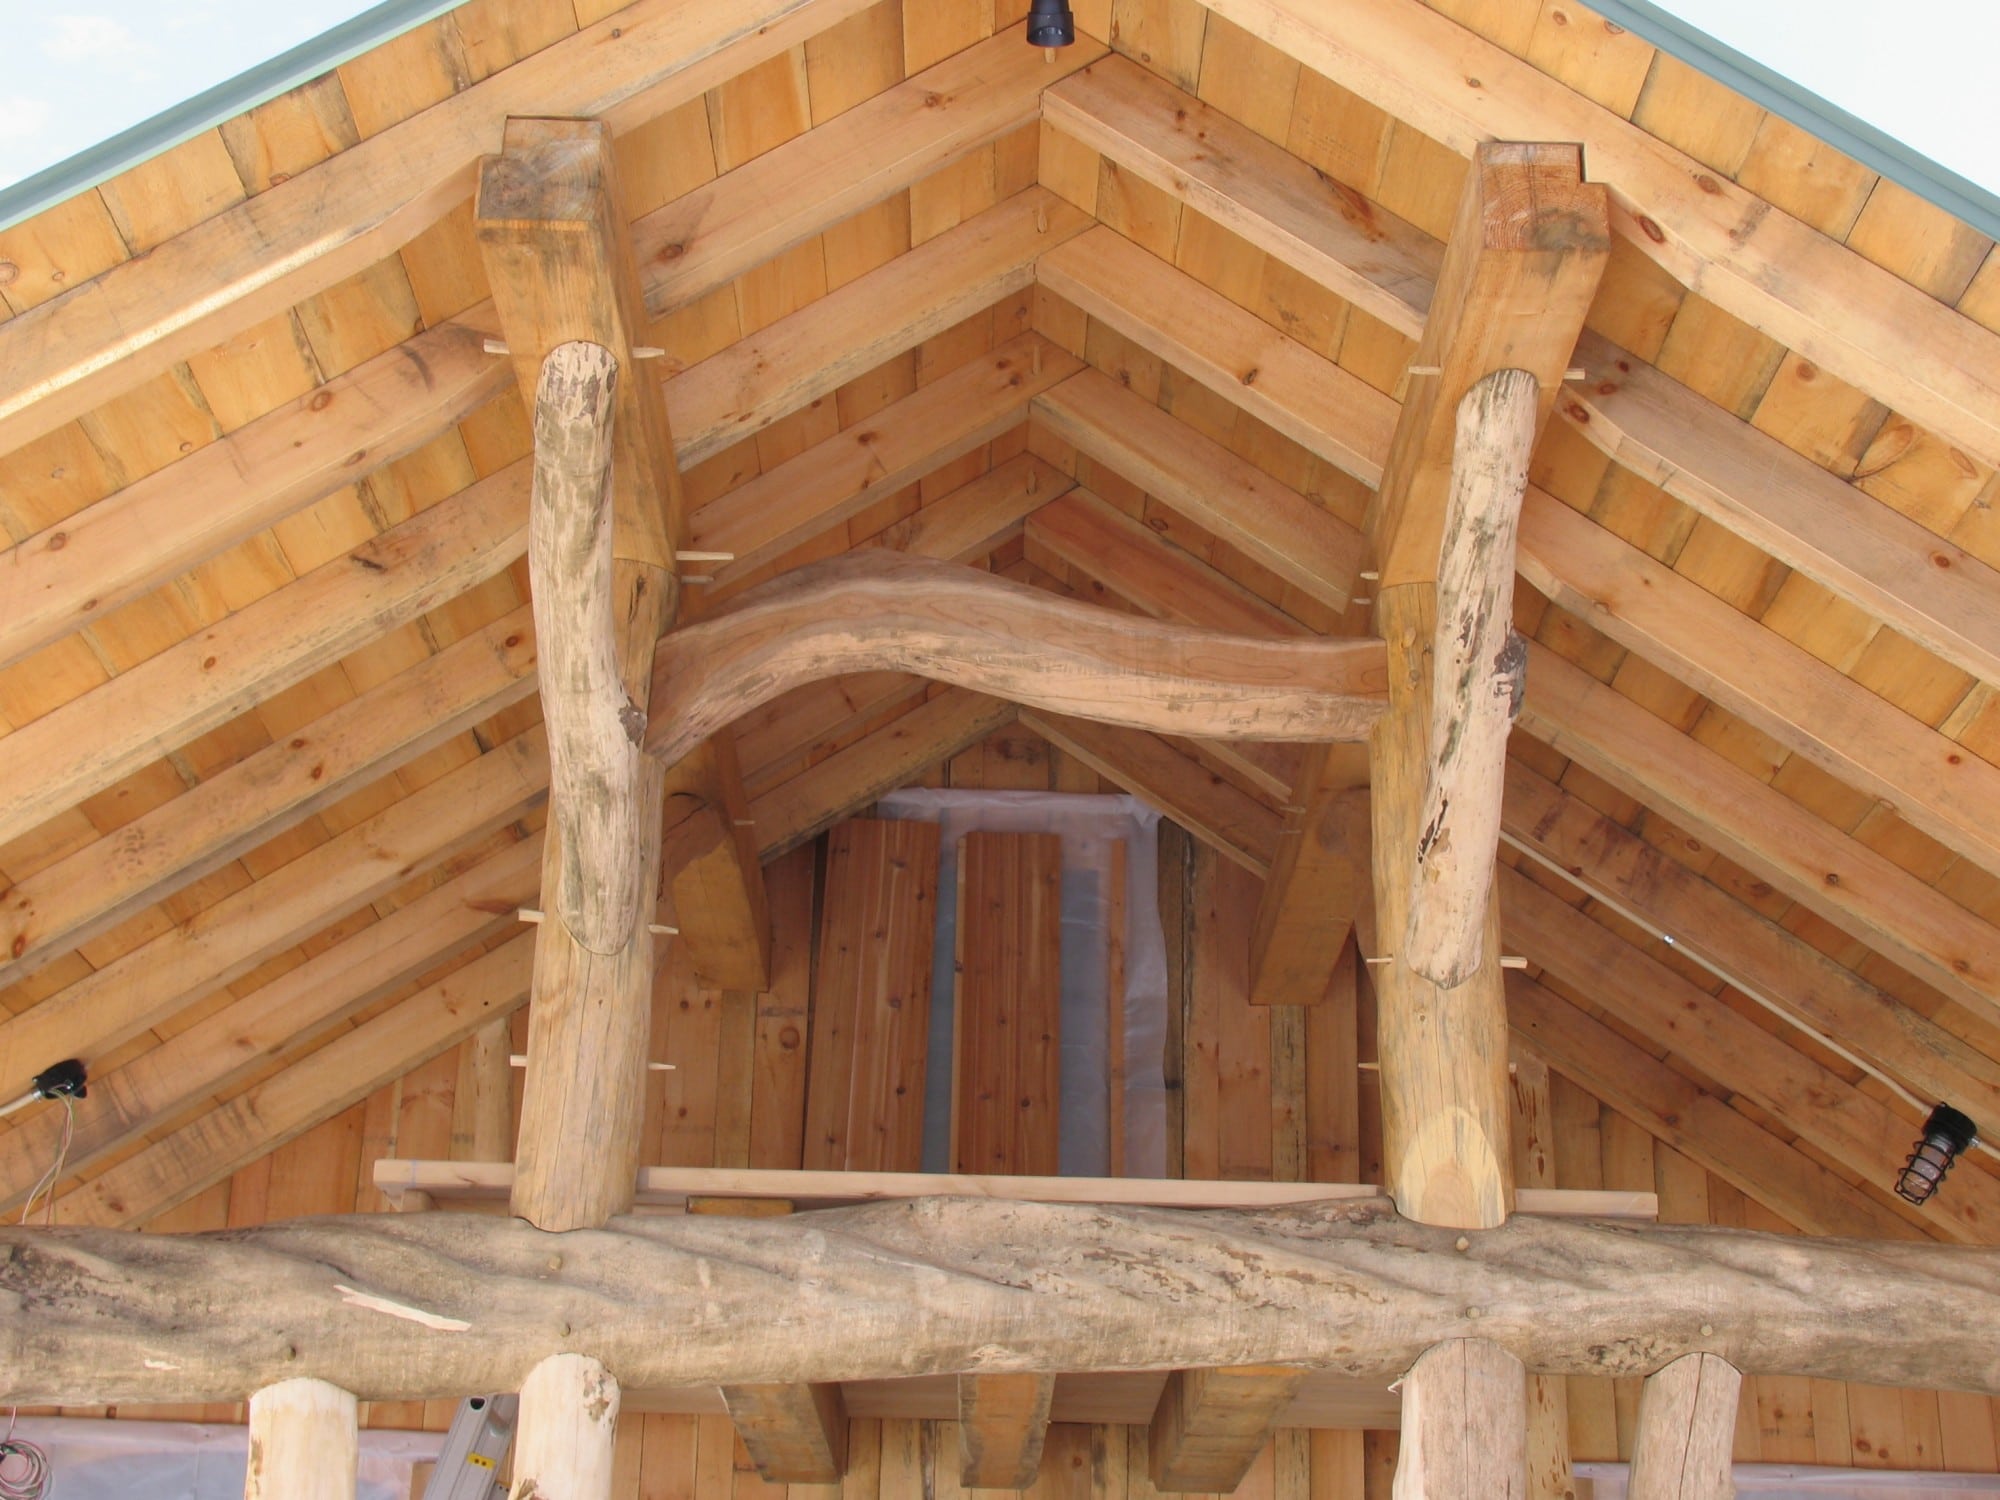 Spectacular Scribe Work in a Timber Frame Sugarhouse